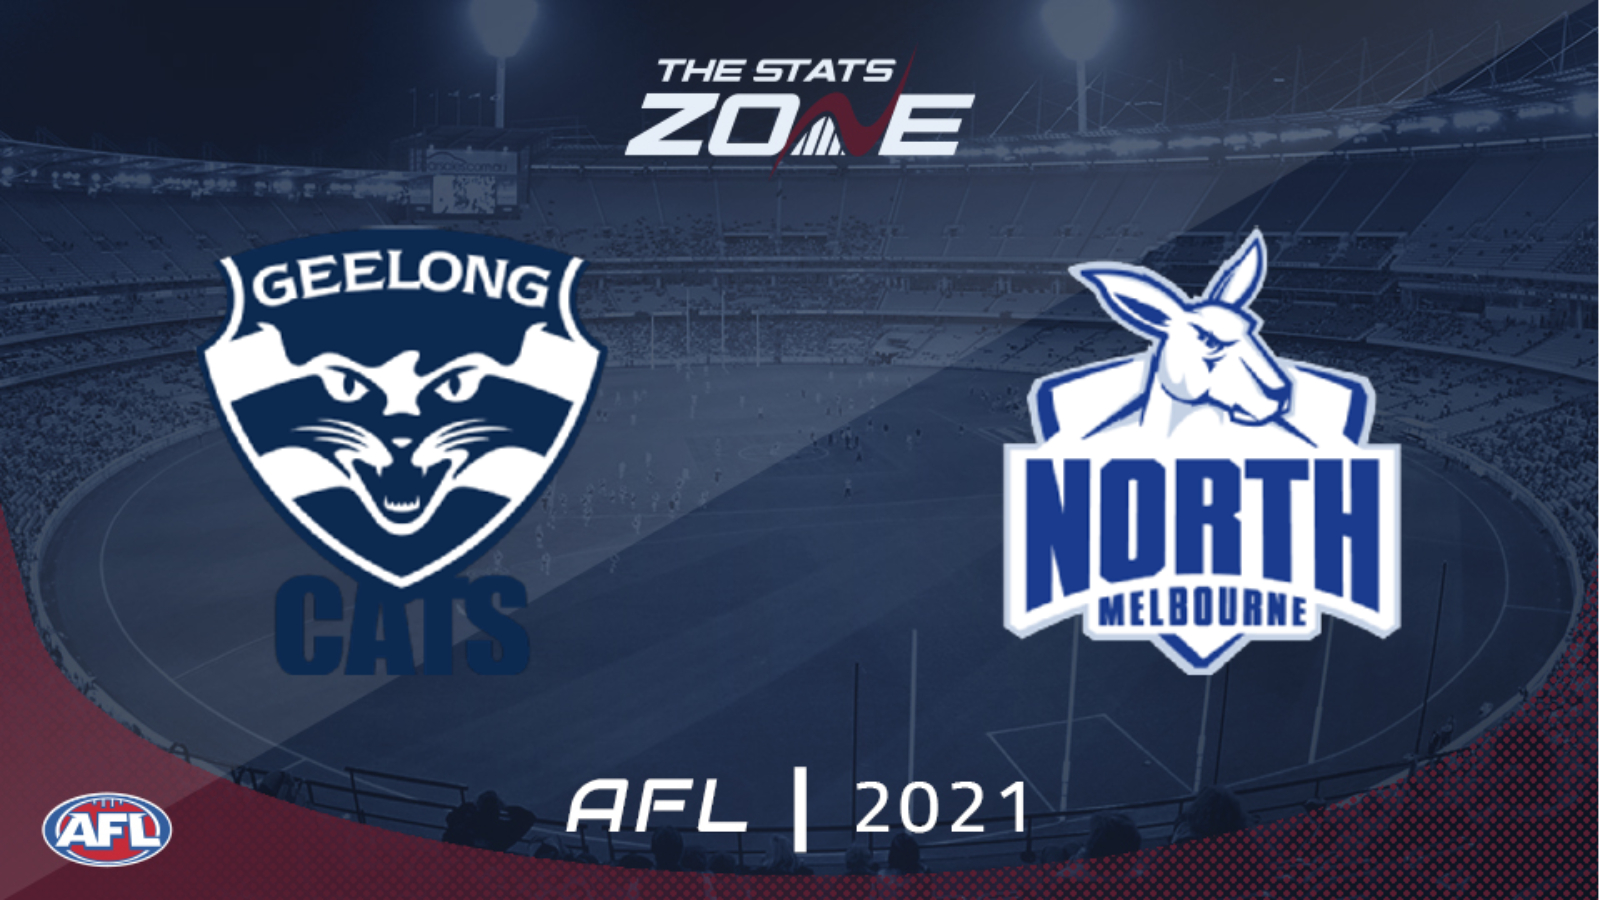 2021 AFL – Geelong Cats vs North Melbourne Preview & Prediction  The